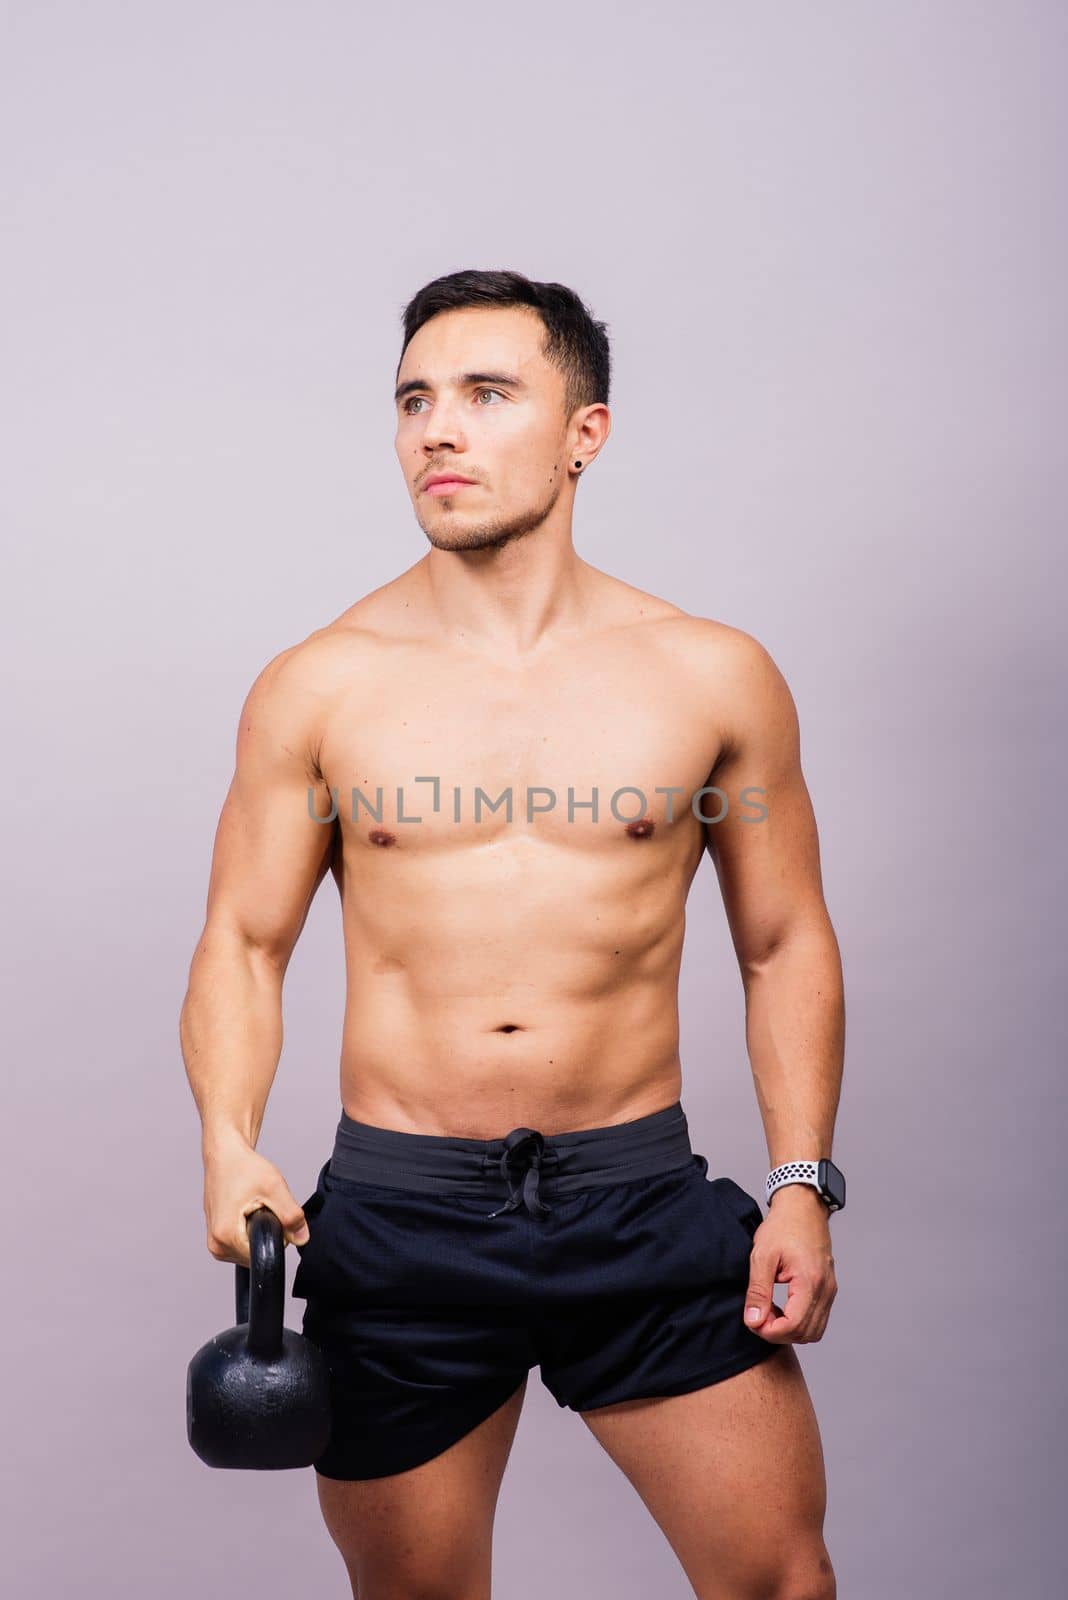 Handsome muscular man holding a kettle bell with copy space. Hispanic male athlete